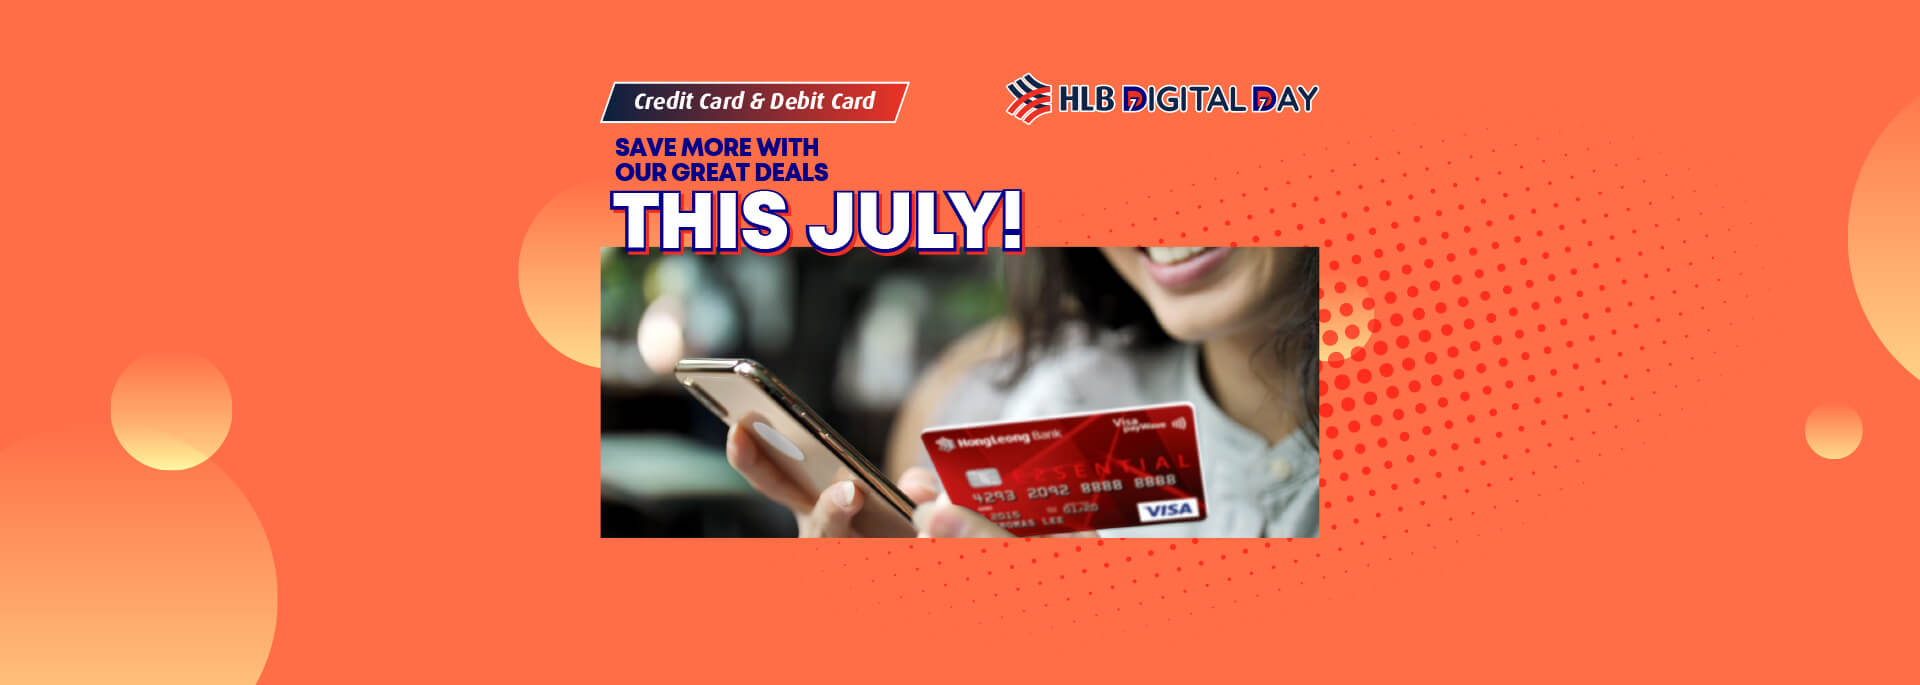 Save more with this July!